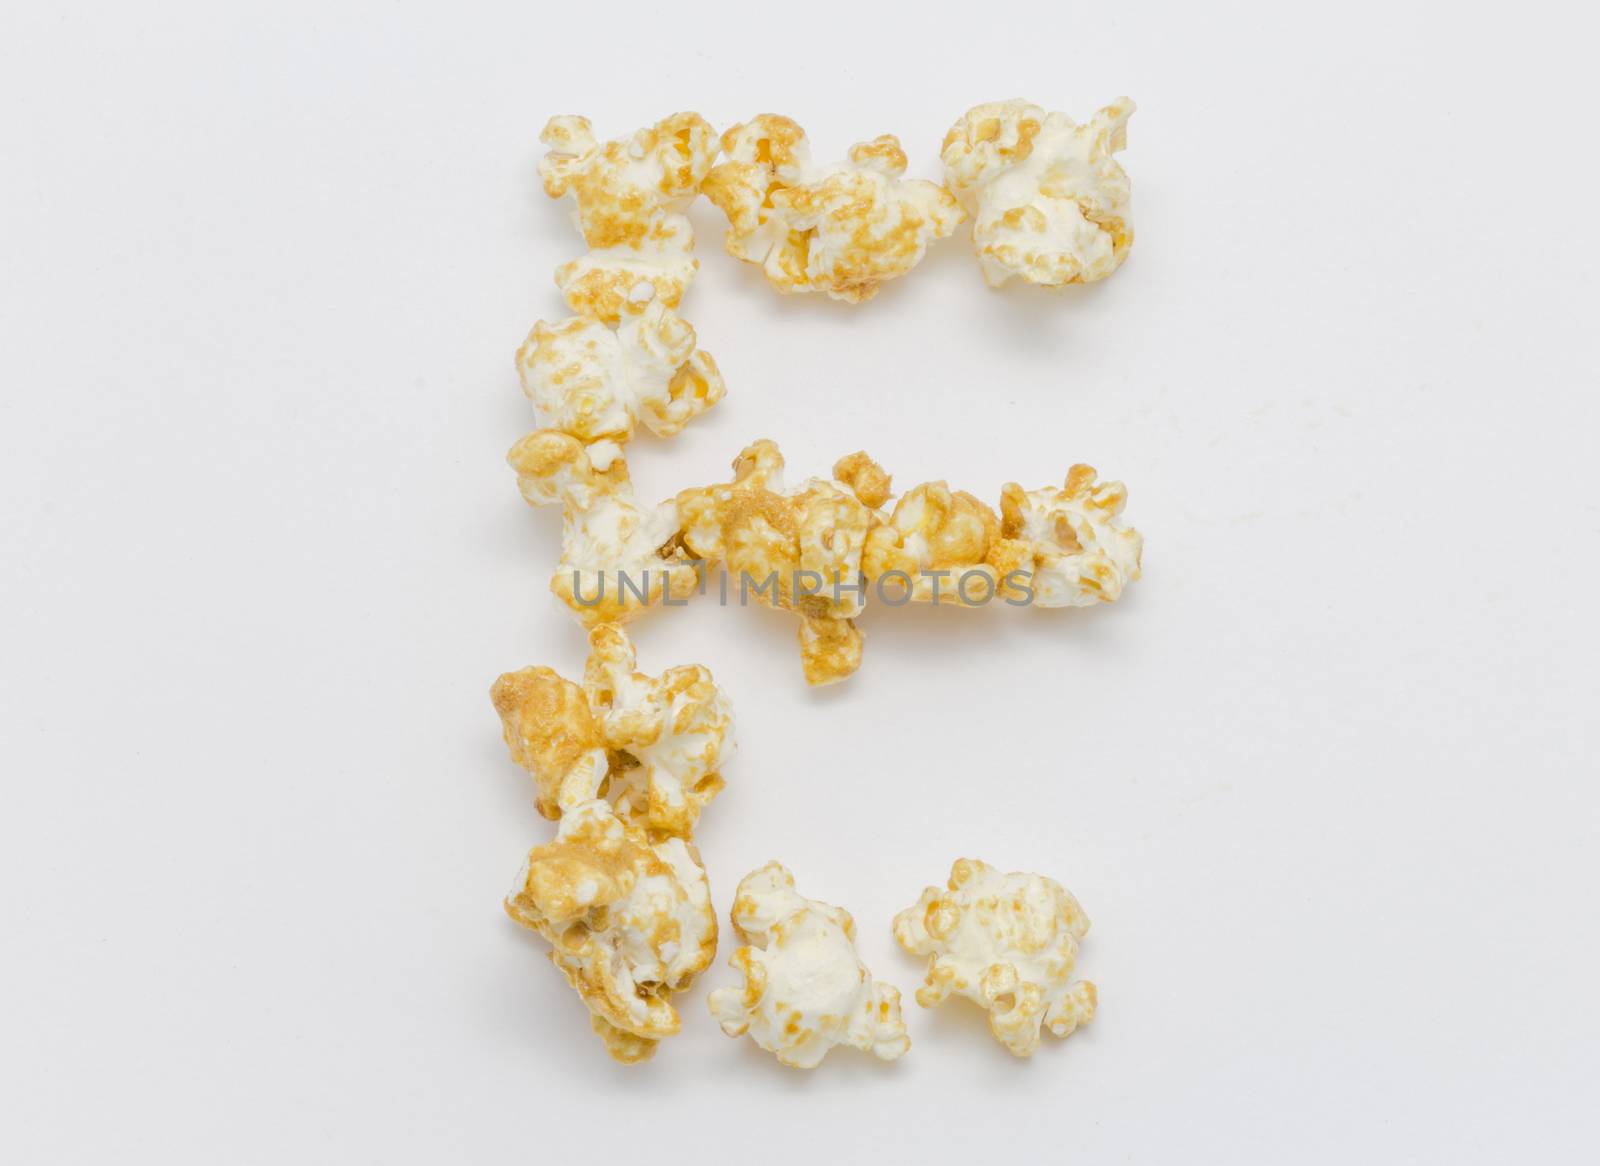 pop corn forming letter E isolated on white background by chingraph